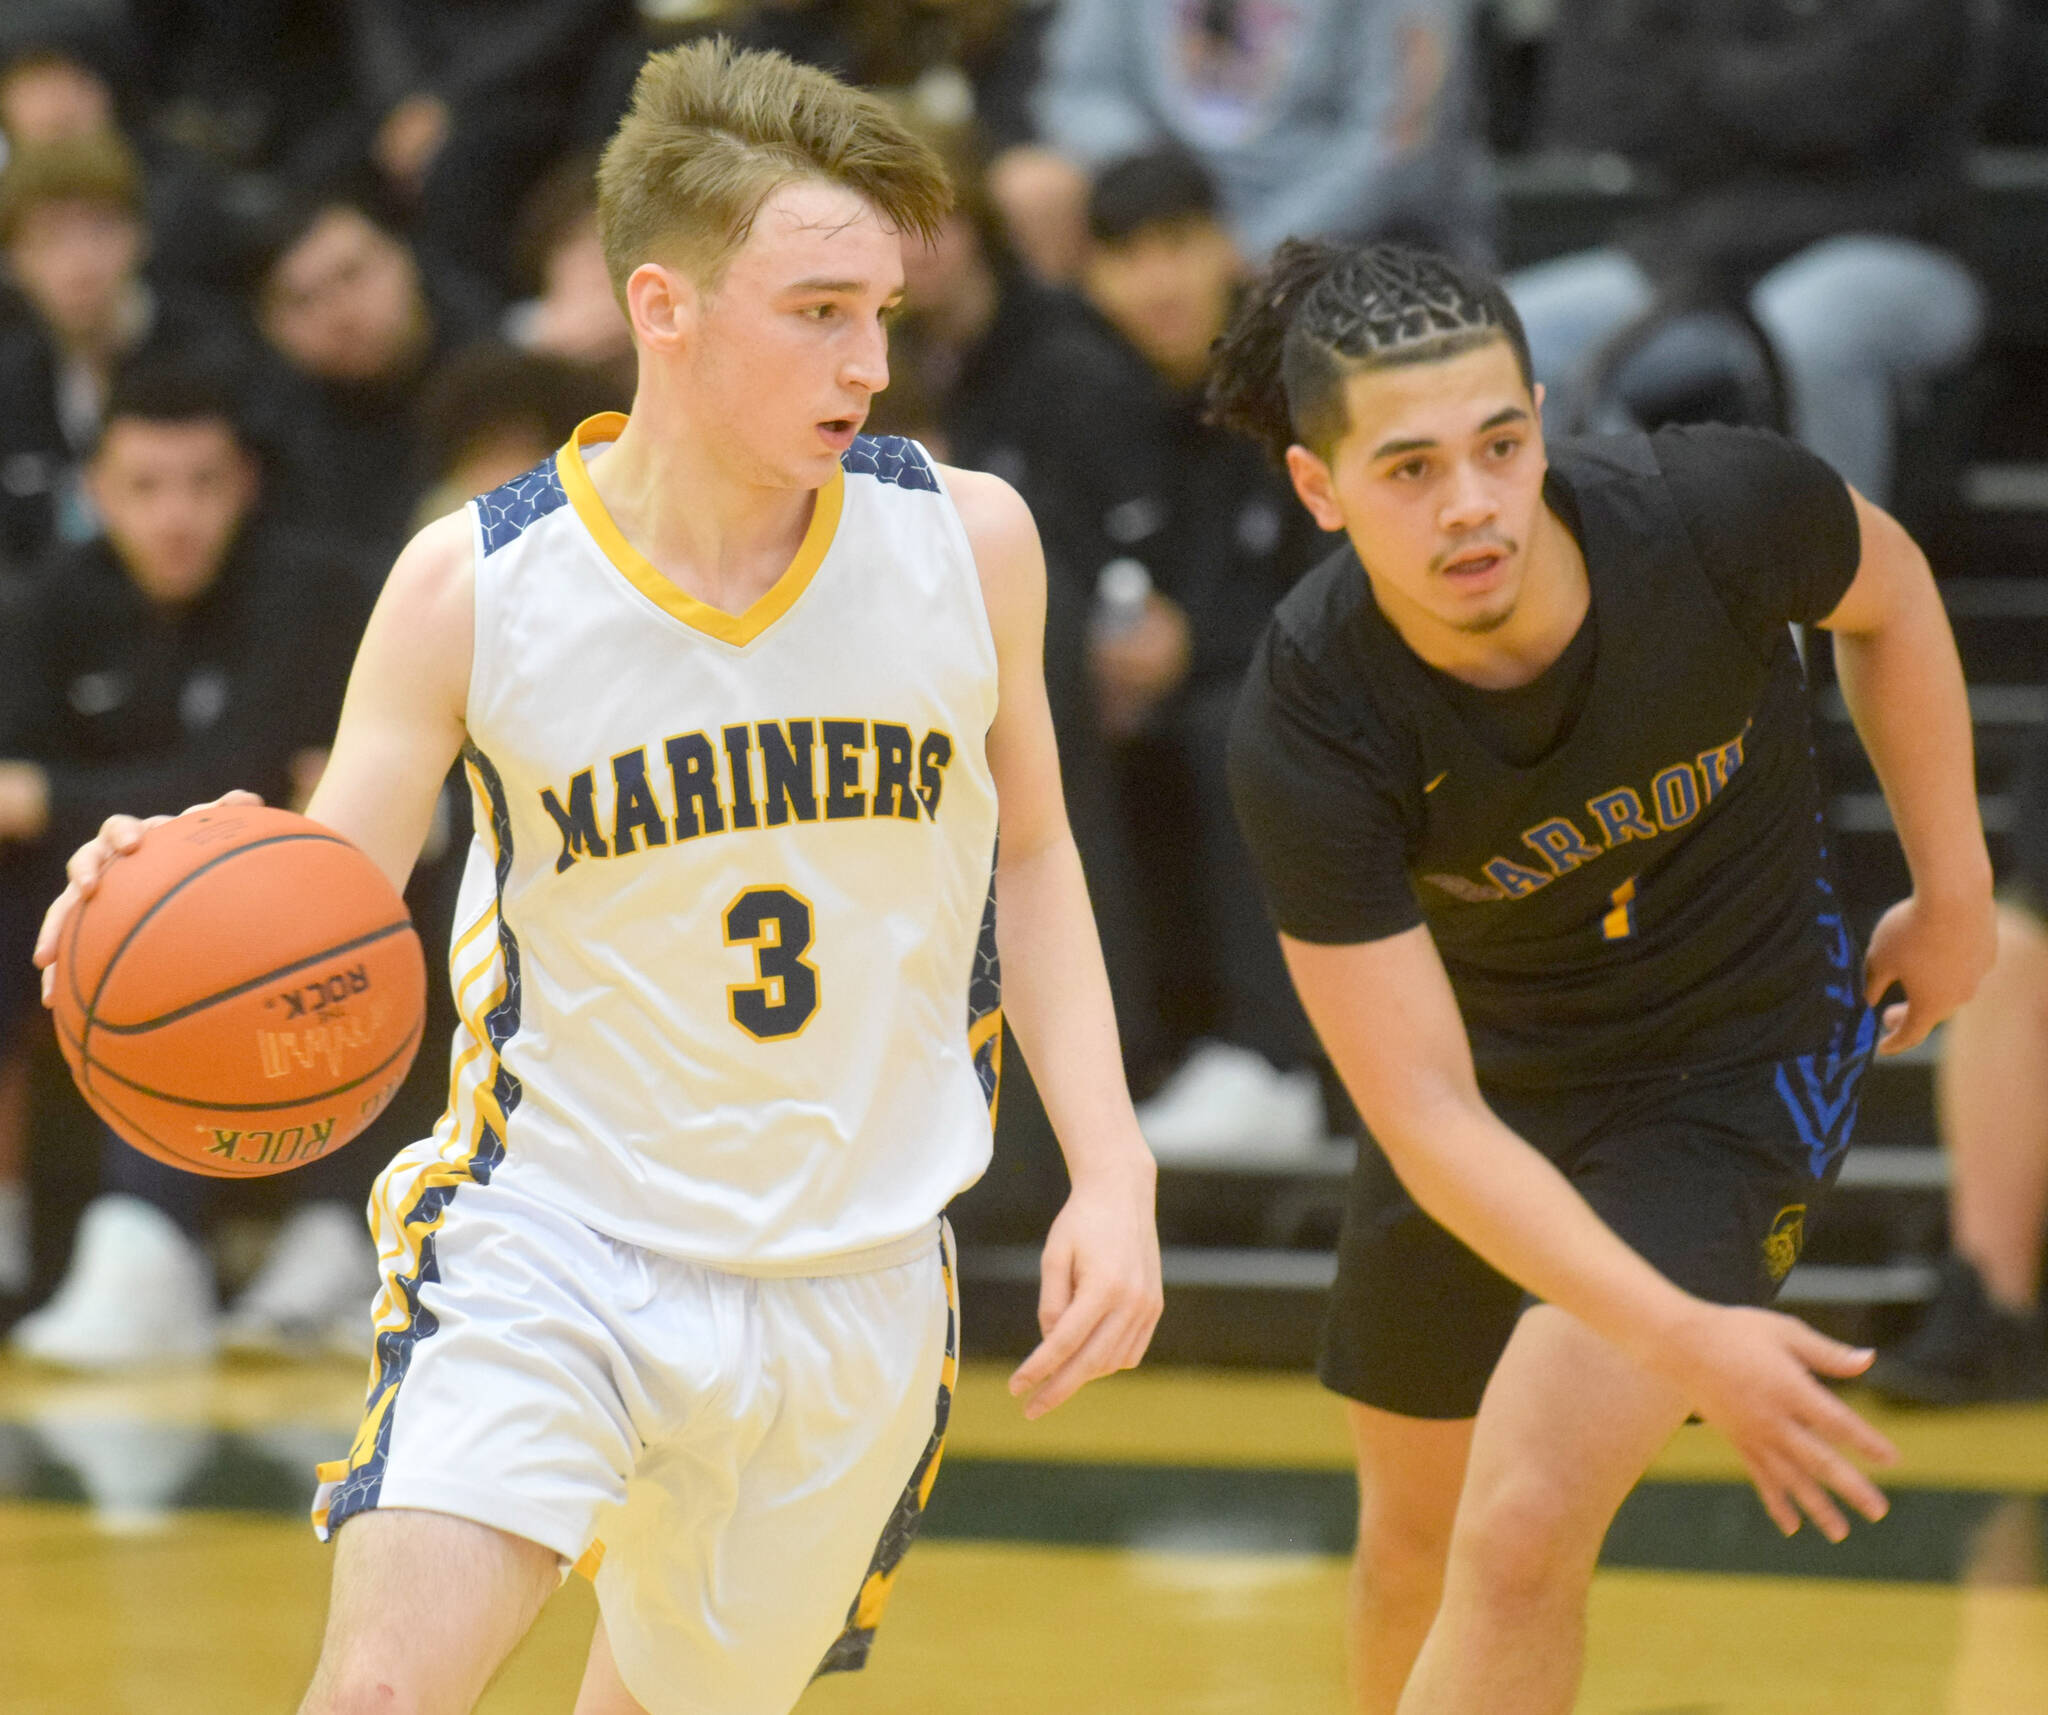 Homer’s Peyton Edens makes a move toward the basket during the Class 3A boys basketball fourth-place semifinals at the Alaska Airlines Center in Anchorage, Alaska, on Thursday, March 24, 2022. (Camille Botello/Peninsula Clarion)